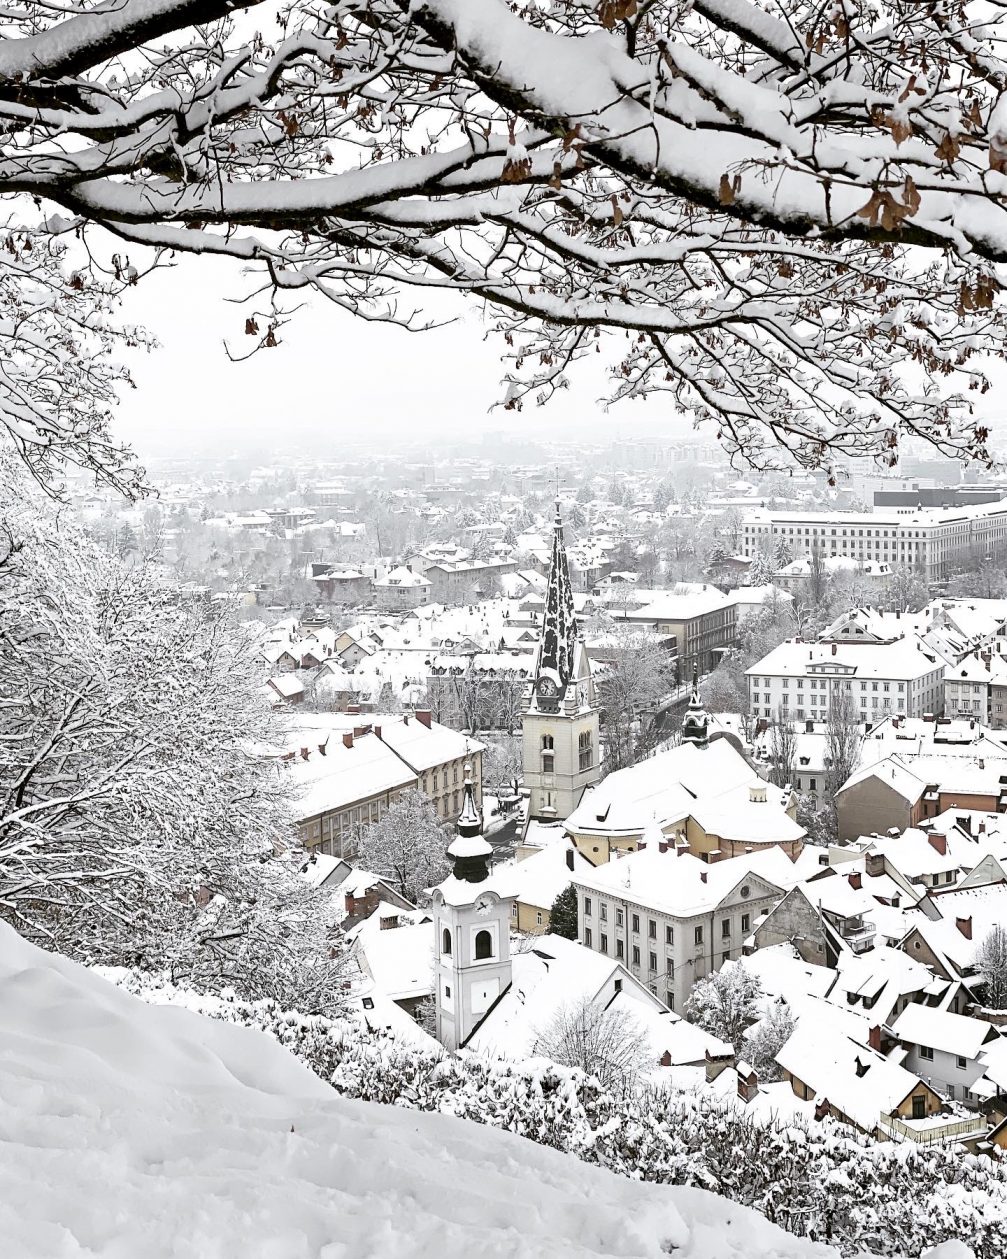 Ljubljana with its snow-topped houses and white weights on covered branches